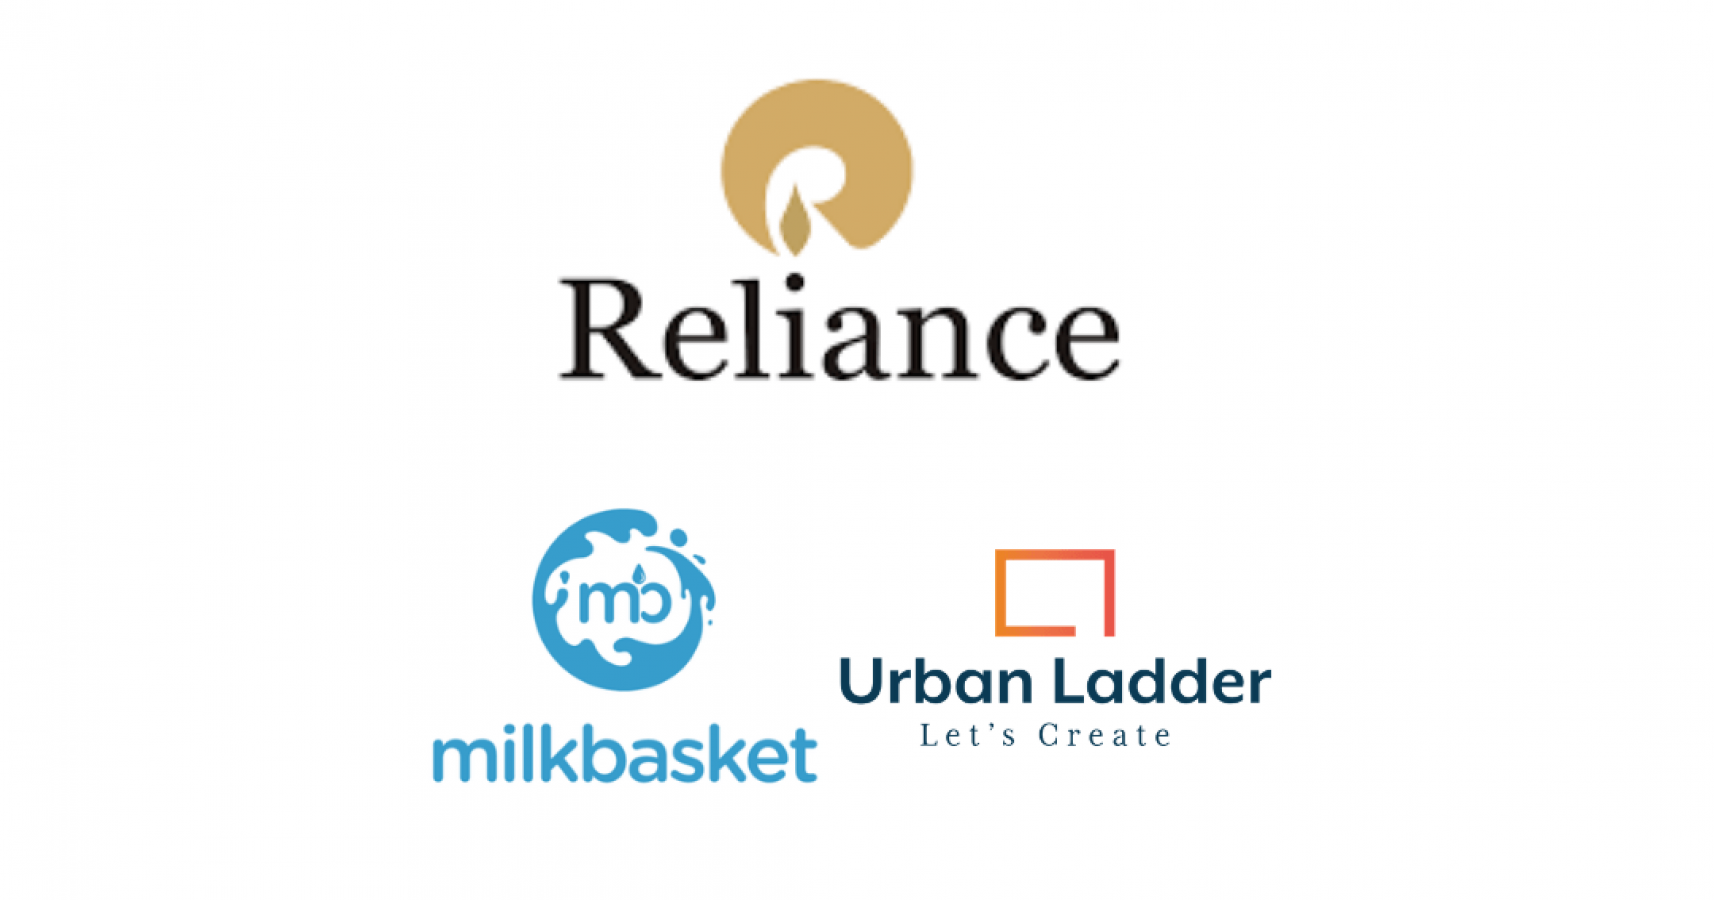 Reliance acquires 96% stake in Urban Ladder - The Statesman